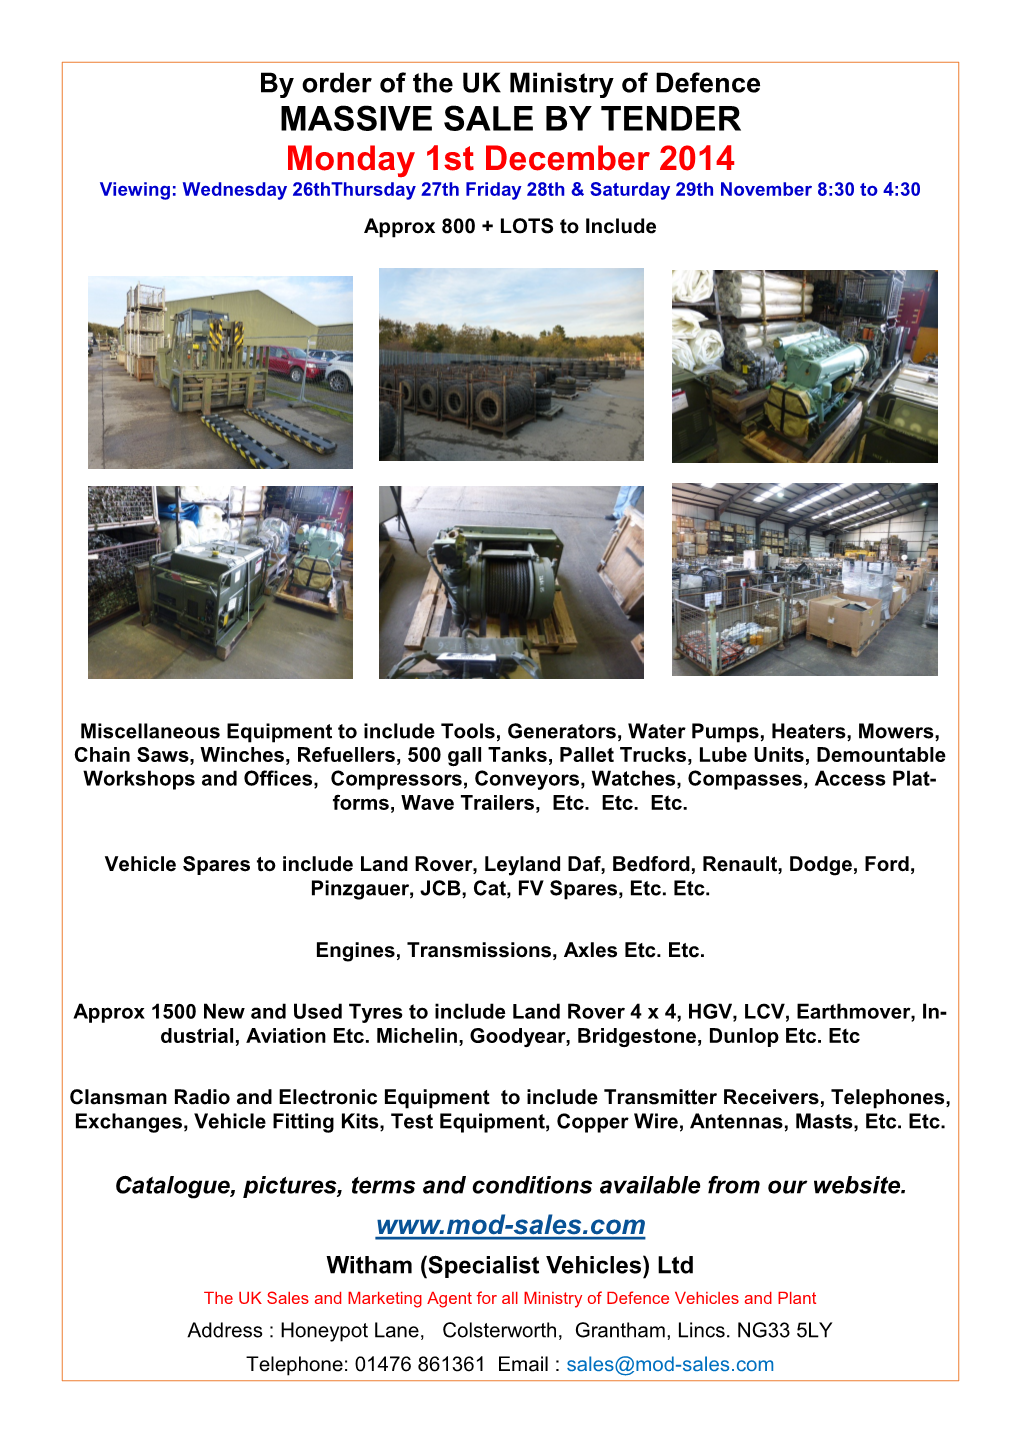 MASSIVE SALE by TENDER Monday 1St December 2014 Viewing: Wednesday 26Ththursday 27Th Friday 28Th & Saturday 29Th November 8:30 to 4:30 Approx 800 + LOTS to Include